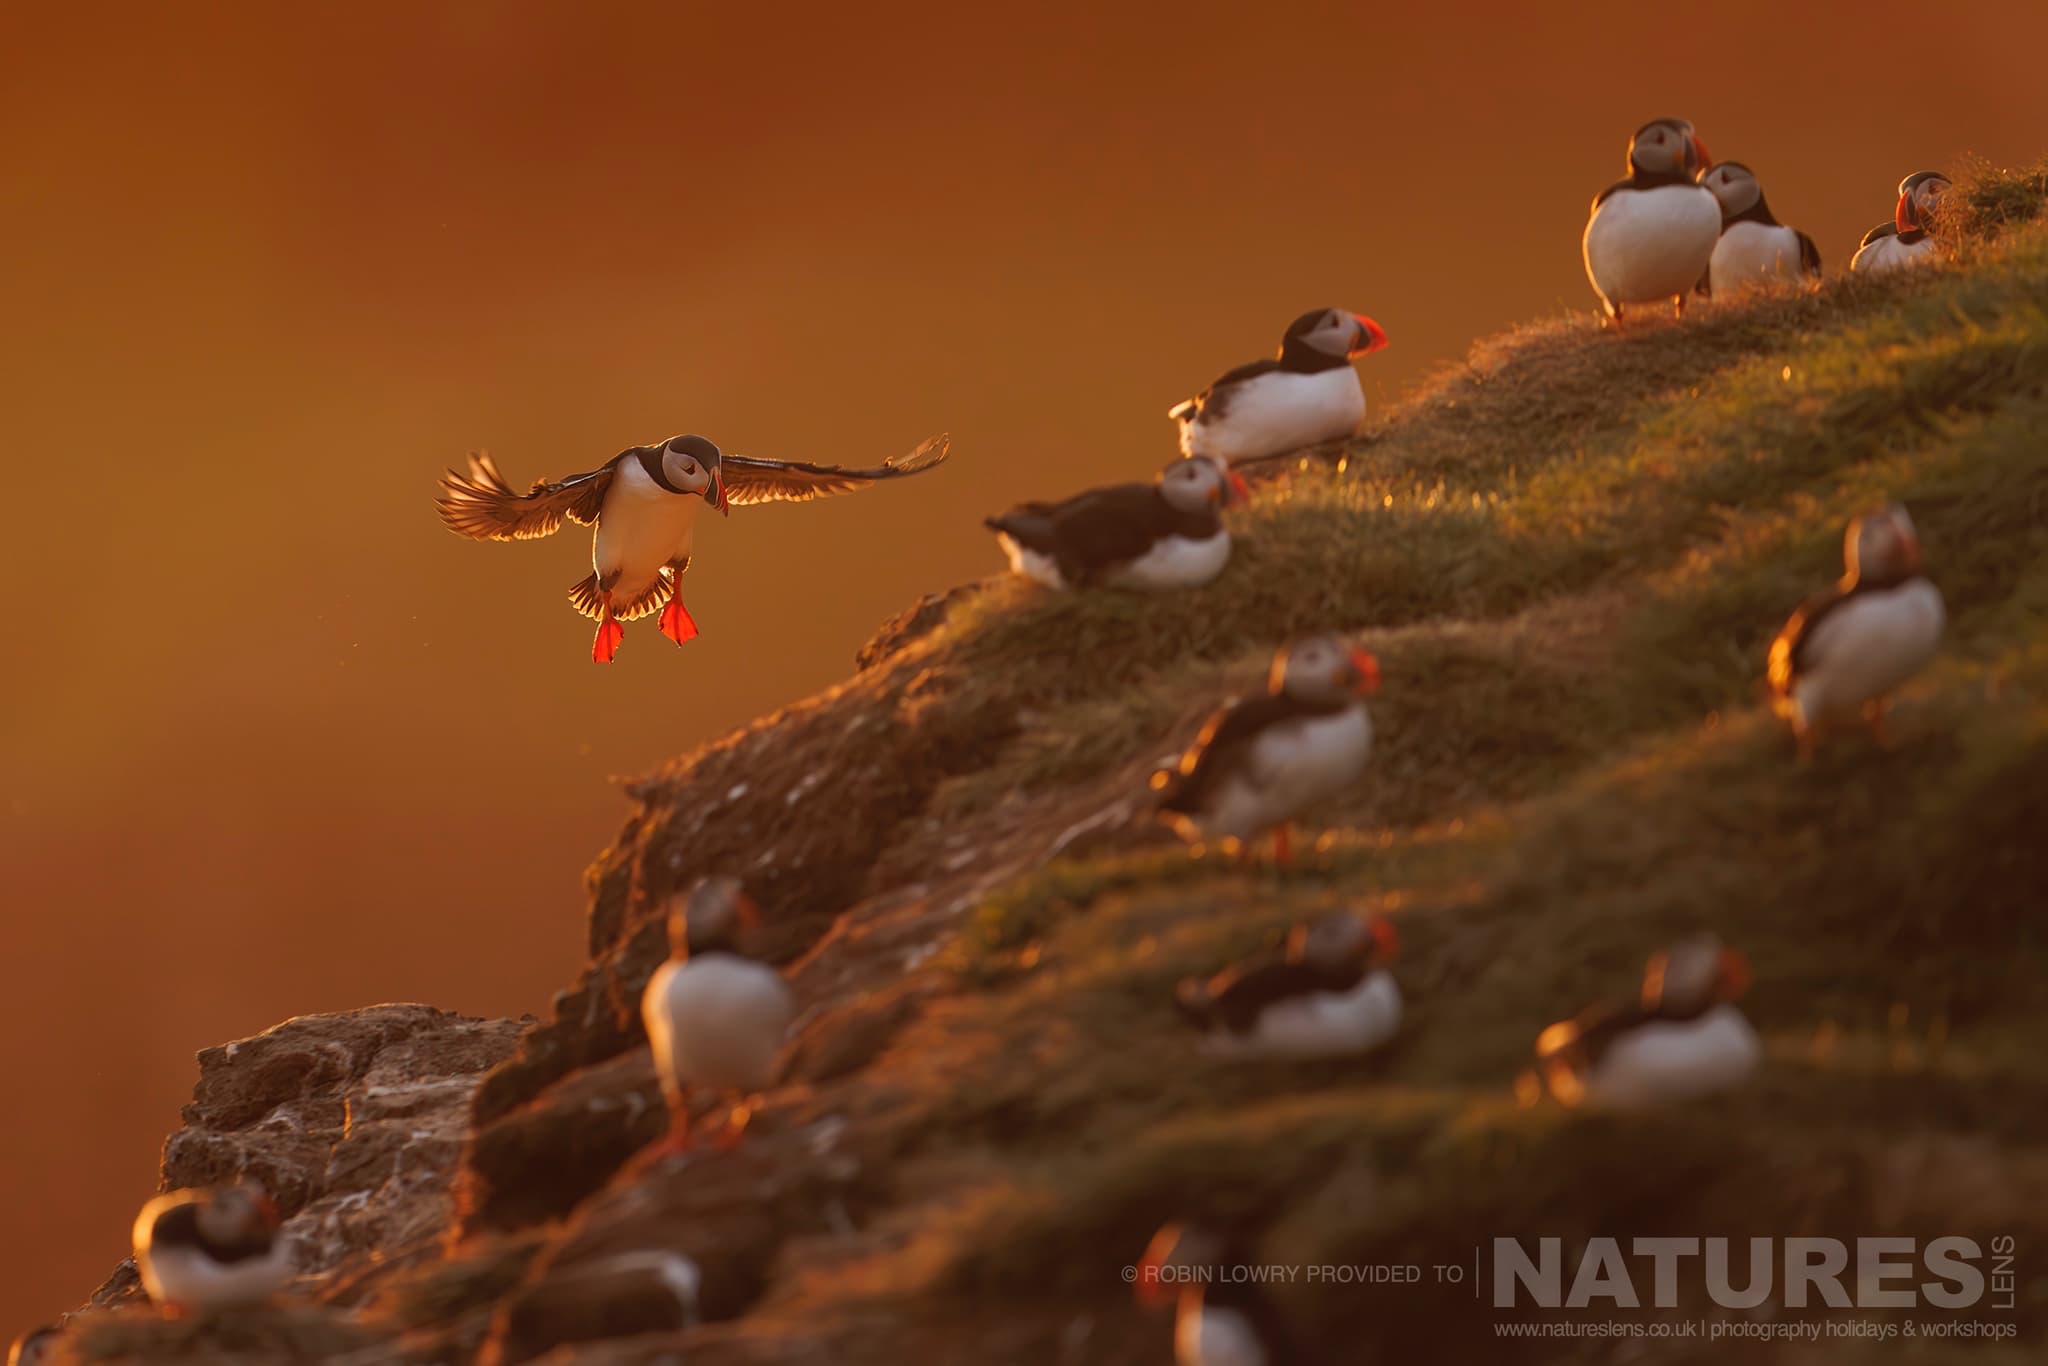 A Group Of Atlantic Puffins, Bathed In Soft Light, Photographed In Their Natural Habitat On Grímsey Island, Iceland